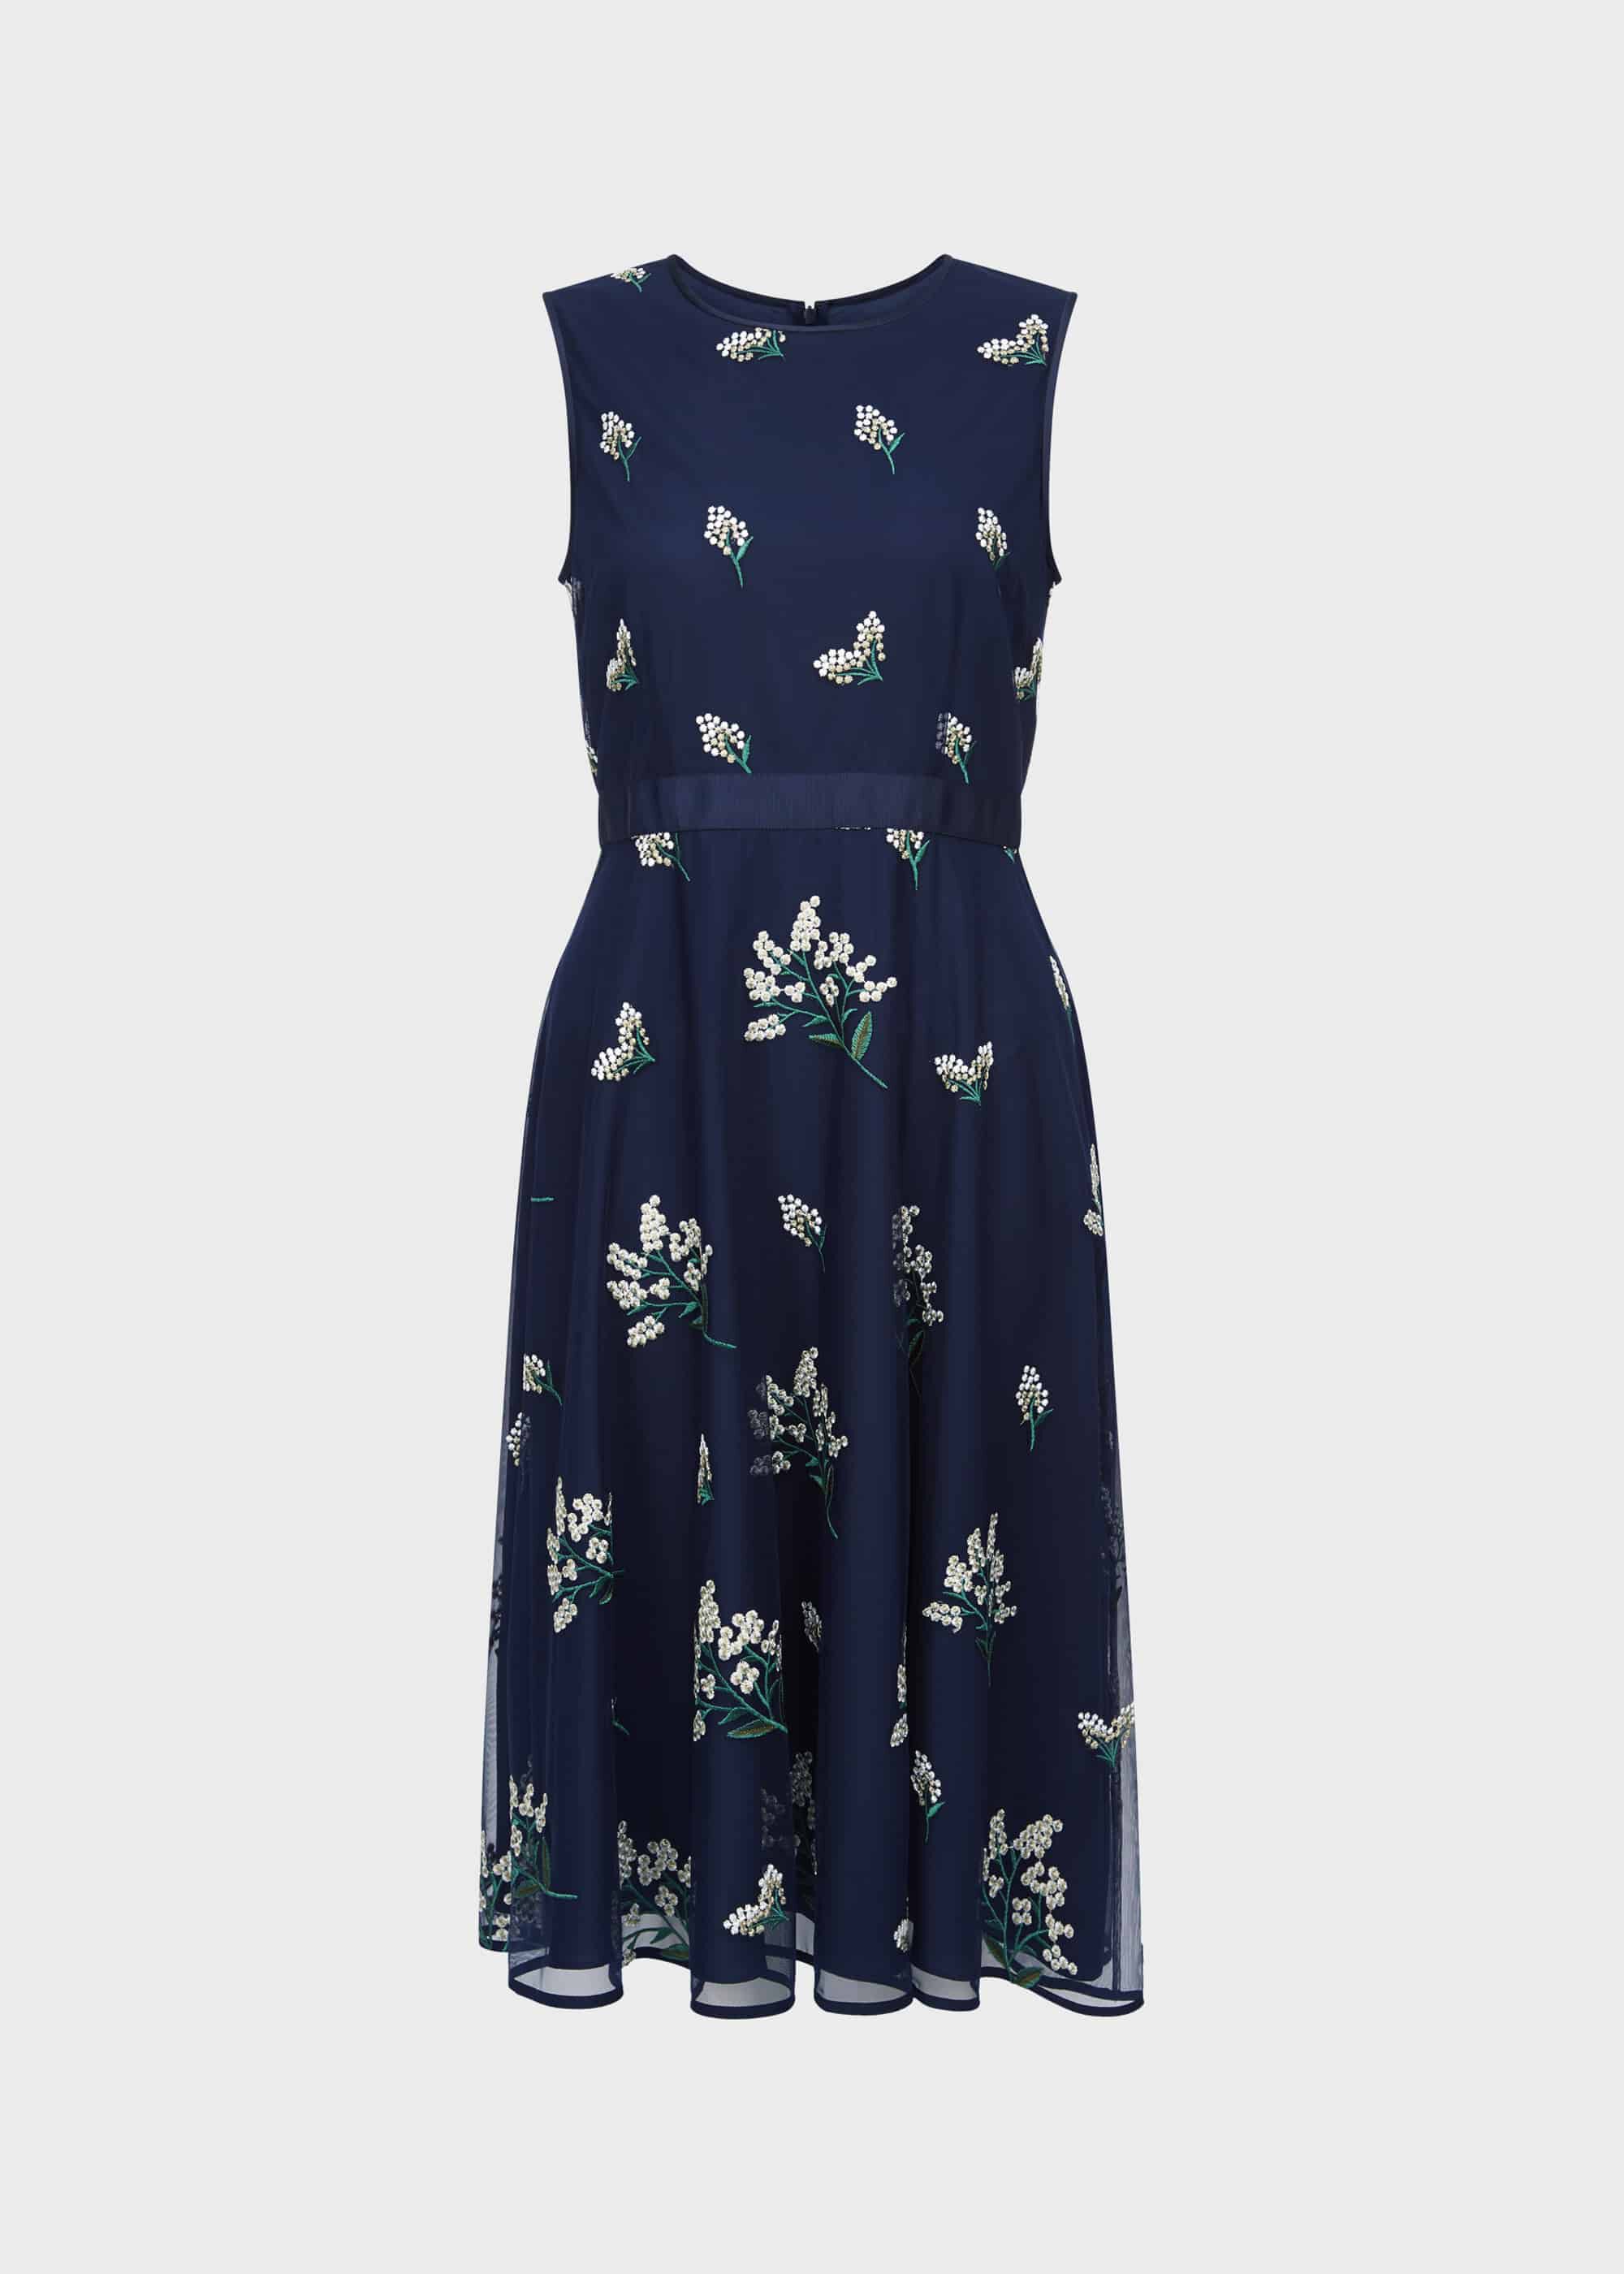 hobbs blue and white floral dress